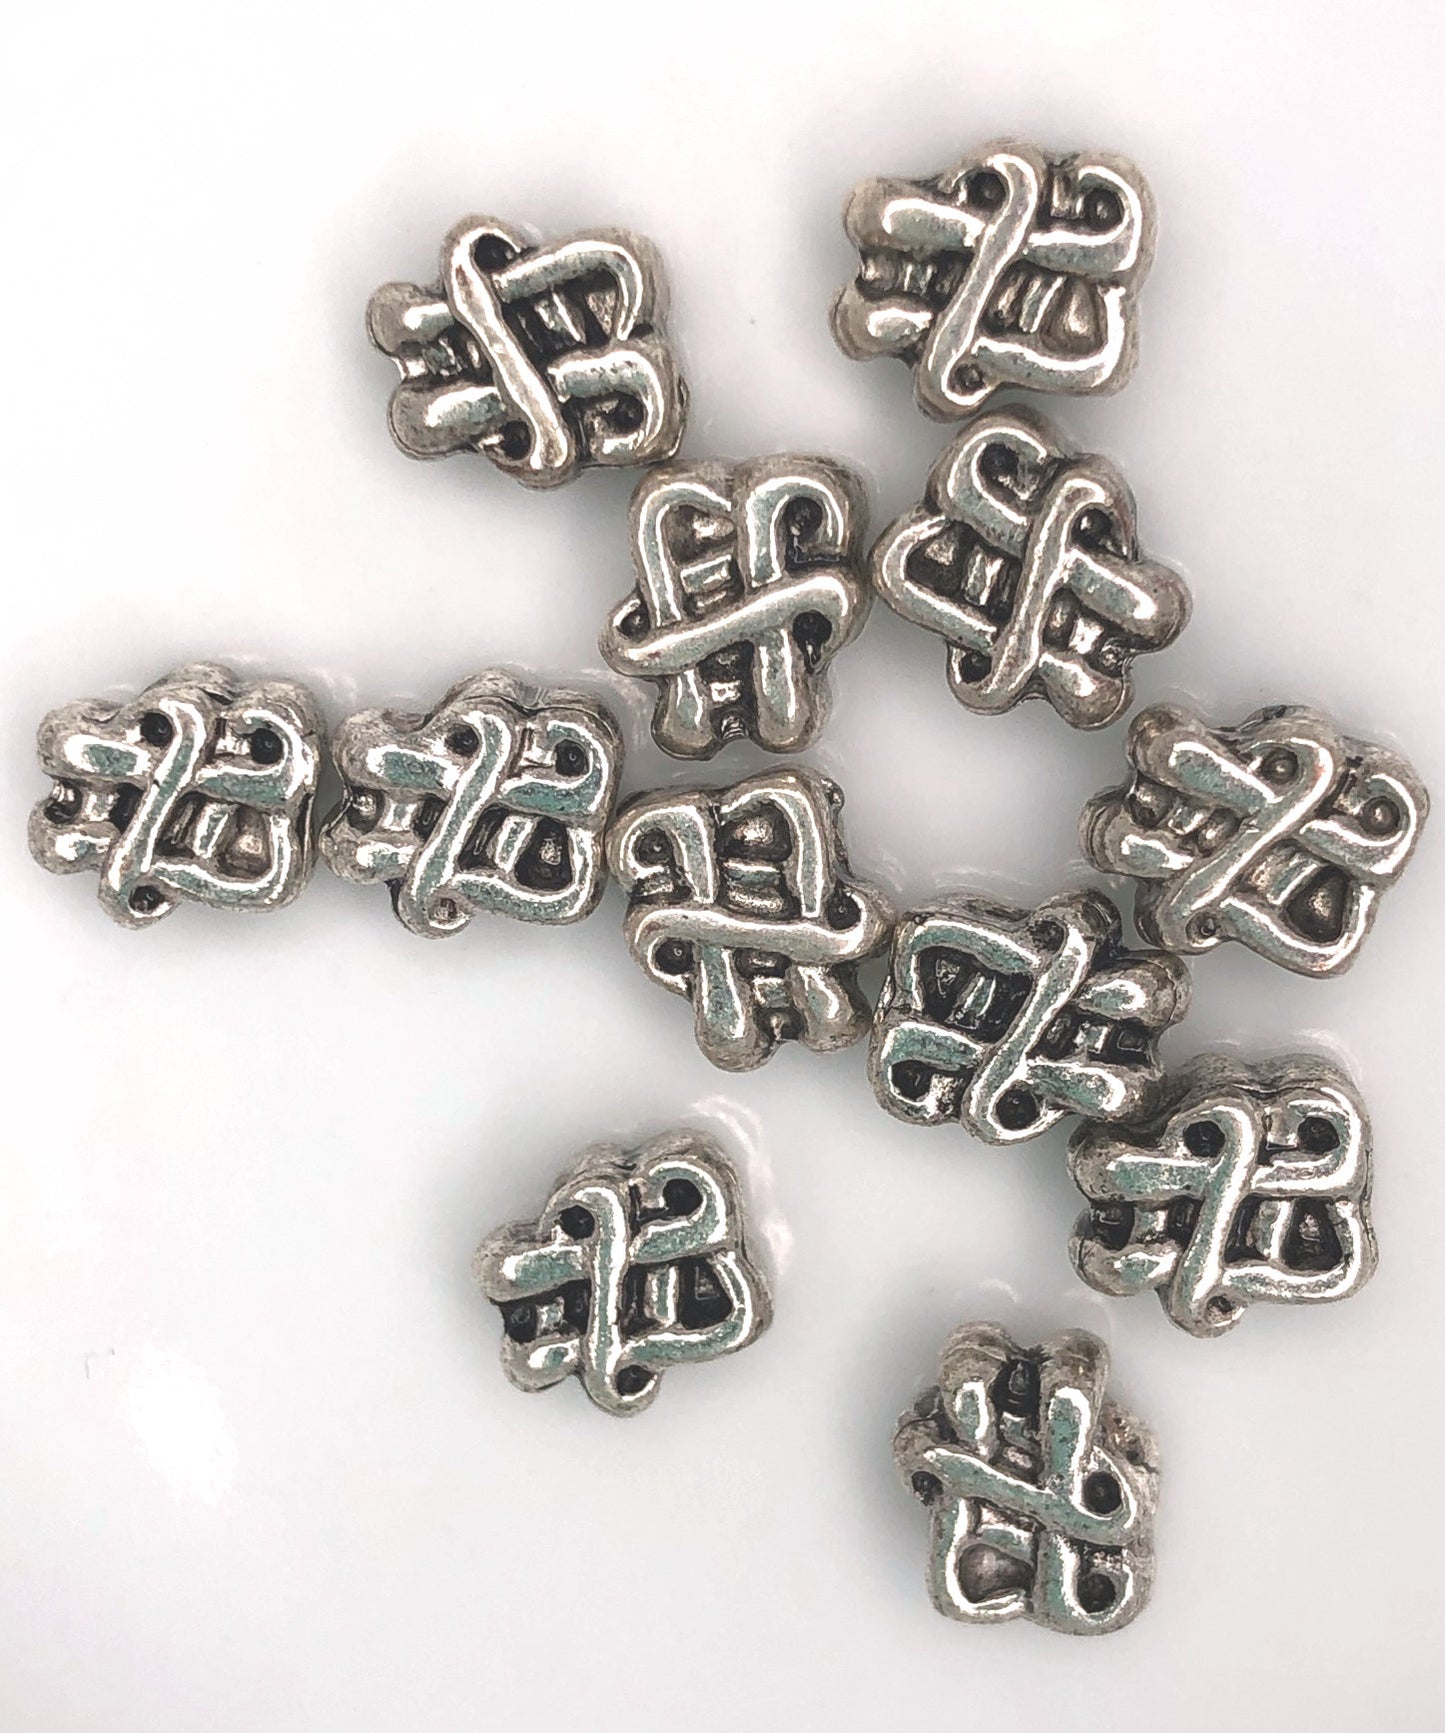 Antique Silver Wavy Celtic Knot Flat Metal Beads, 7 x 8 x 4 mm - 12 or 14 Beads